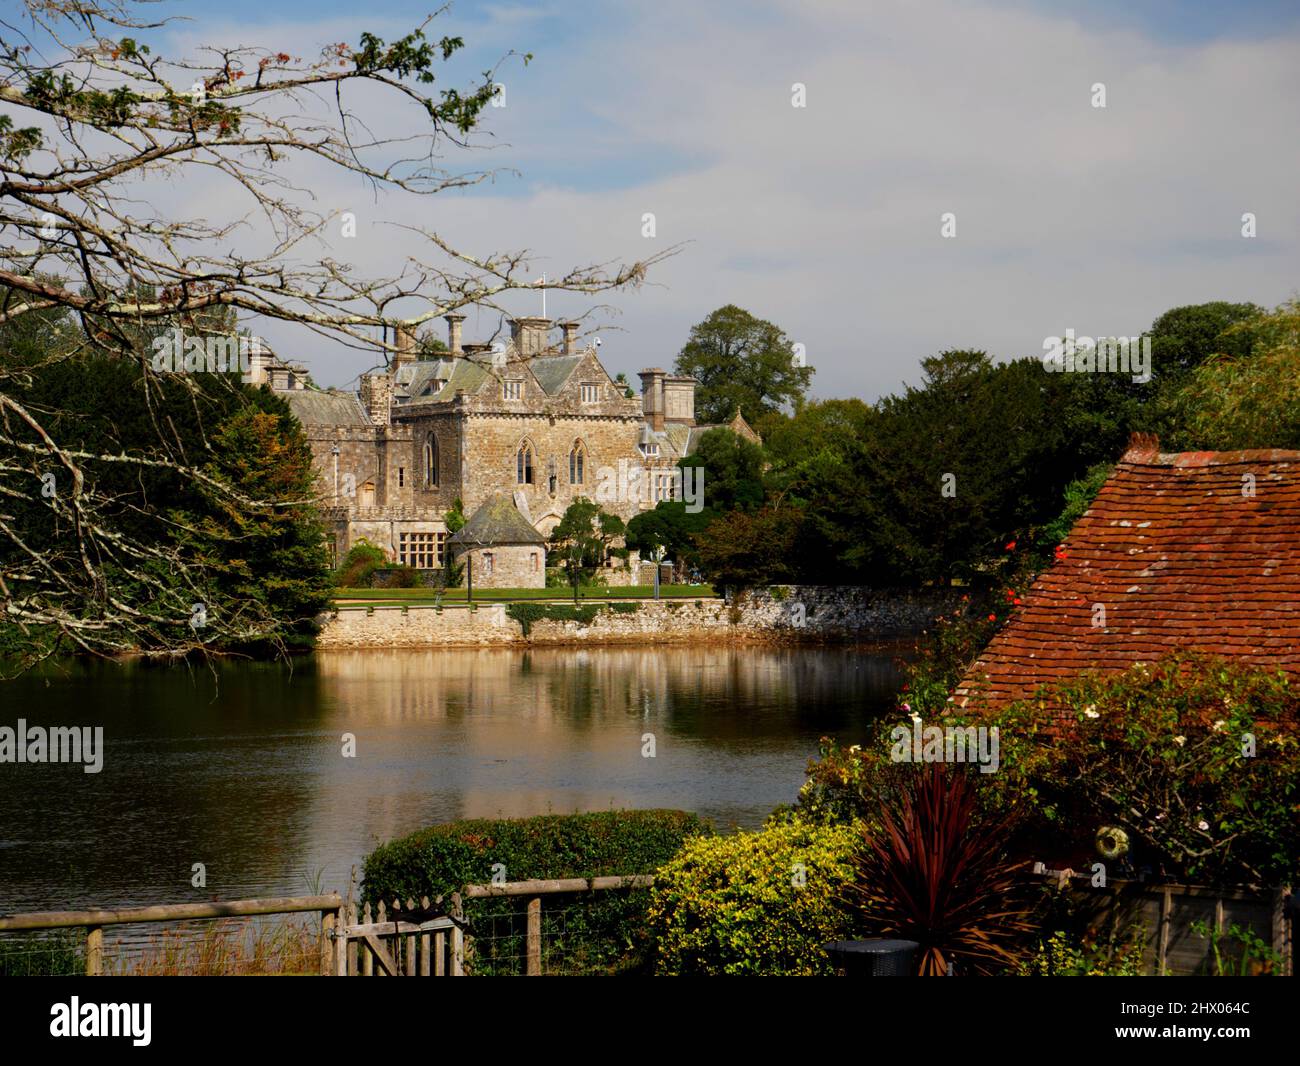 Palace House, Beaulieu, seen from across the Beaulieu River and Mill Dam, New Forest, Hampshire. Stock Photo